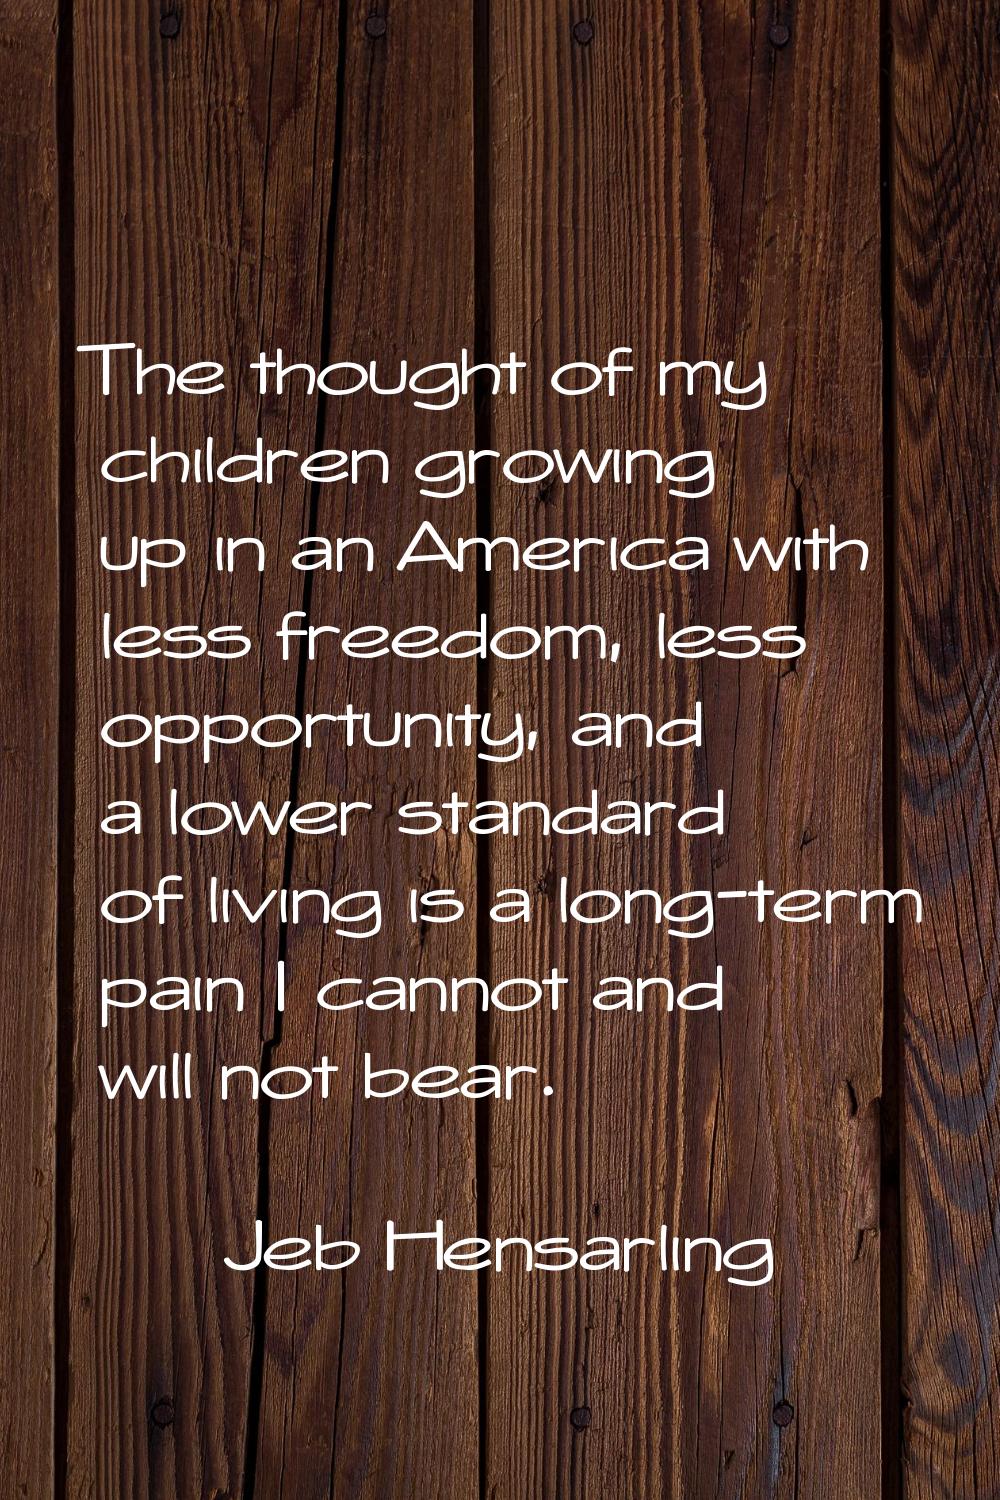 The thought of my children growing up in an America with less freedom, less opportunity, and a lowe